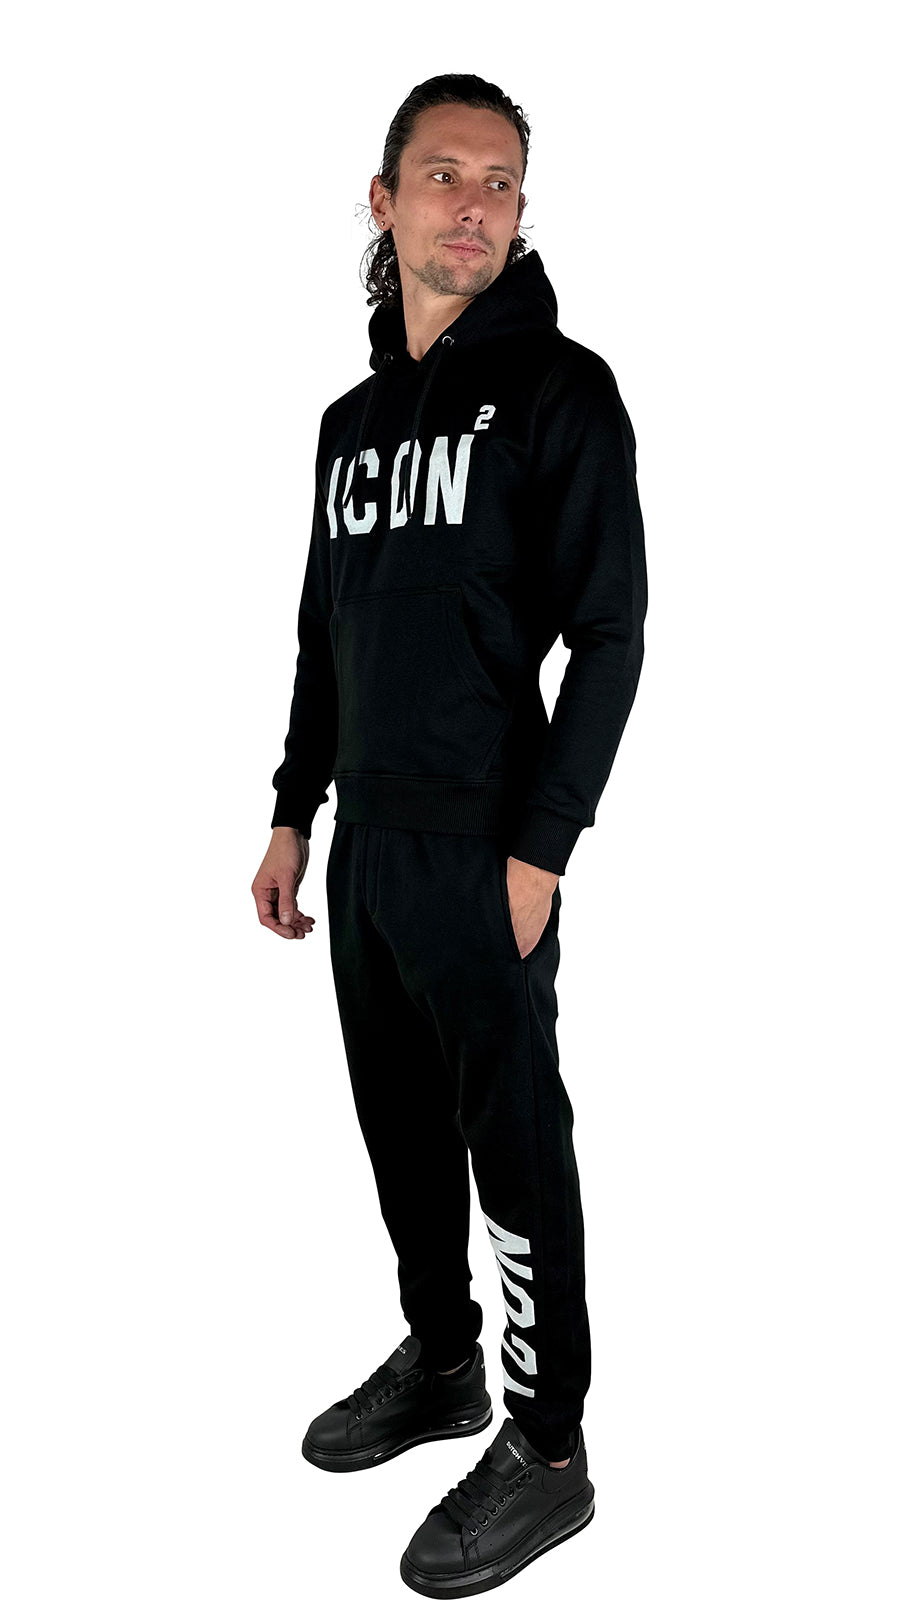 THE ICON TRACK SUIT - BLACK